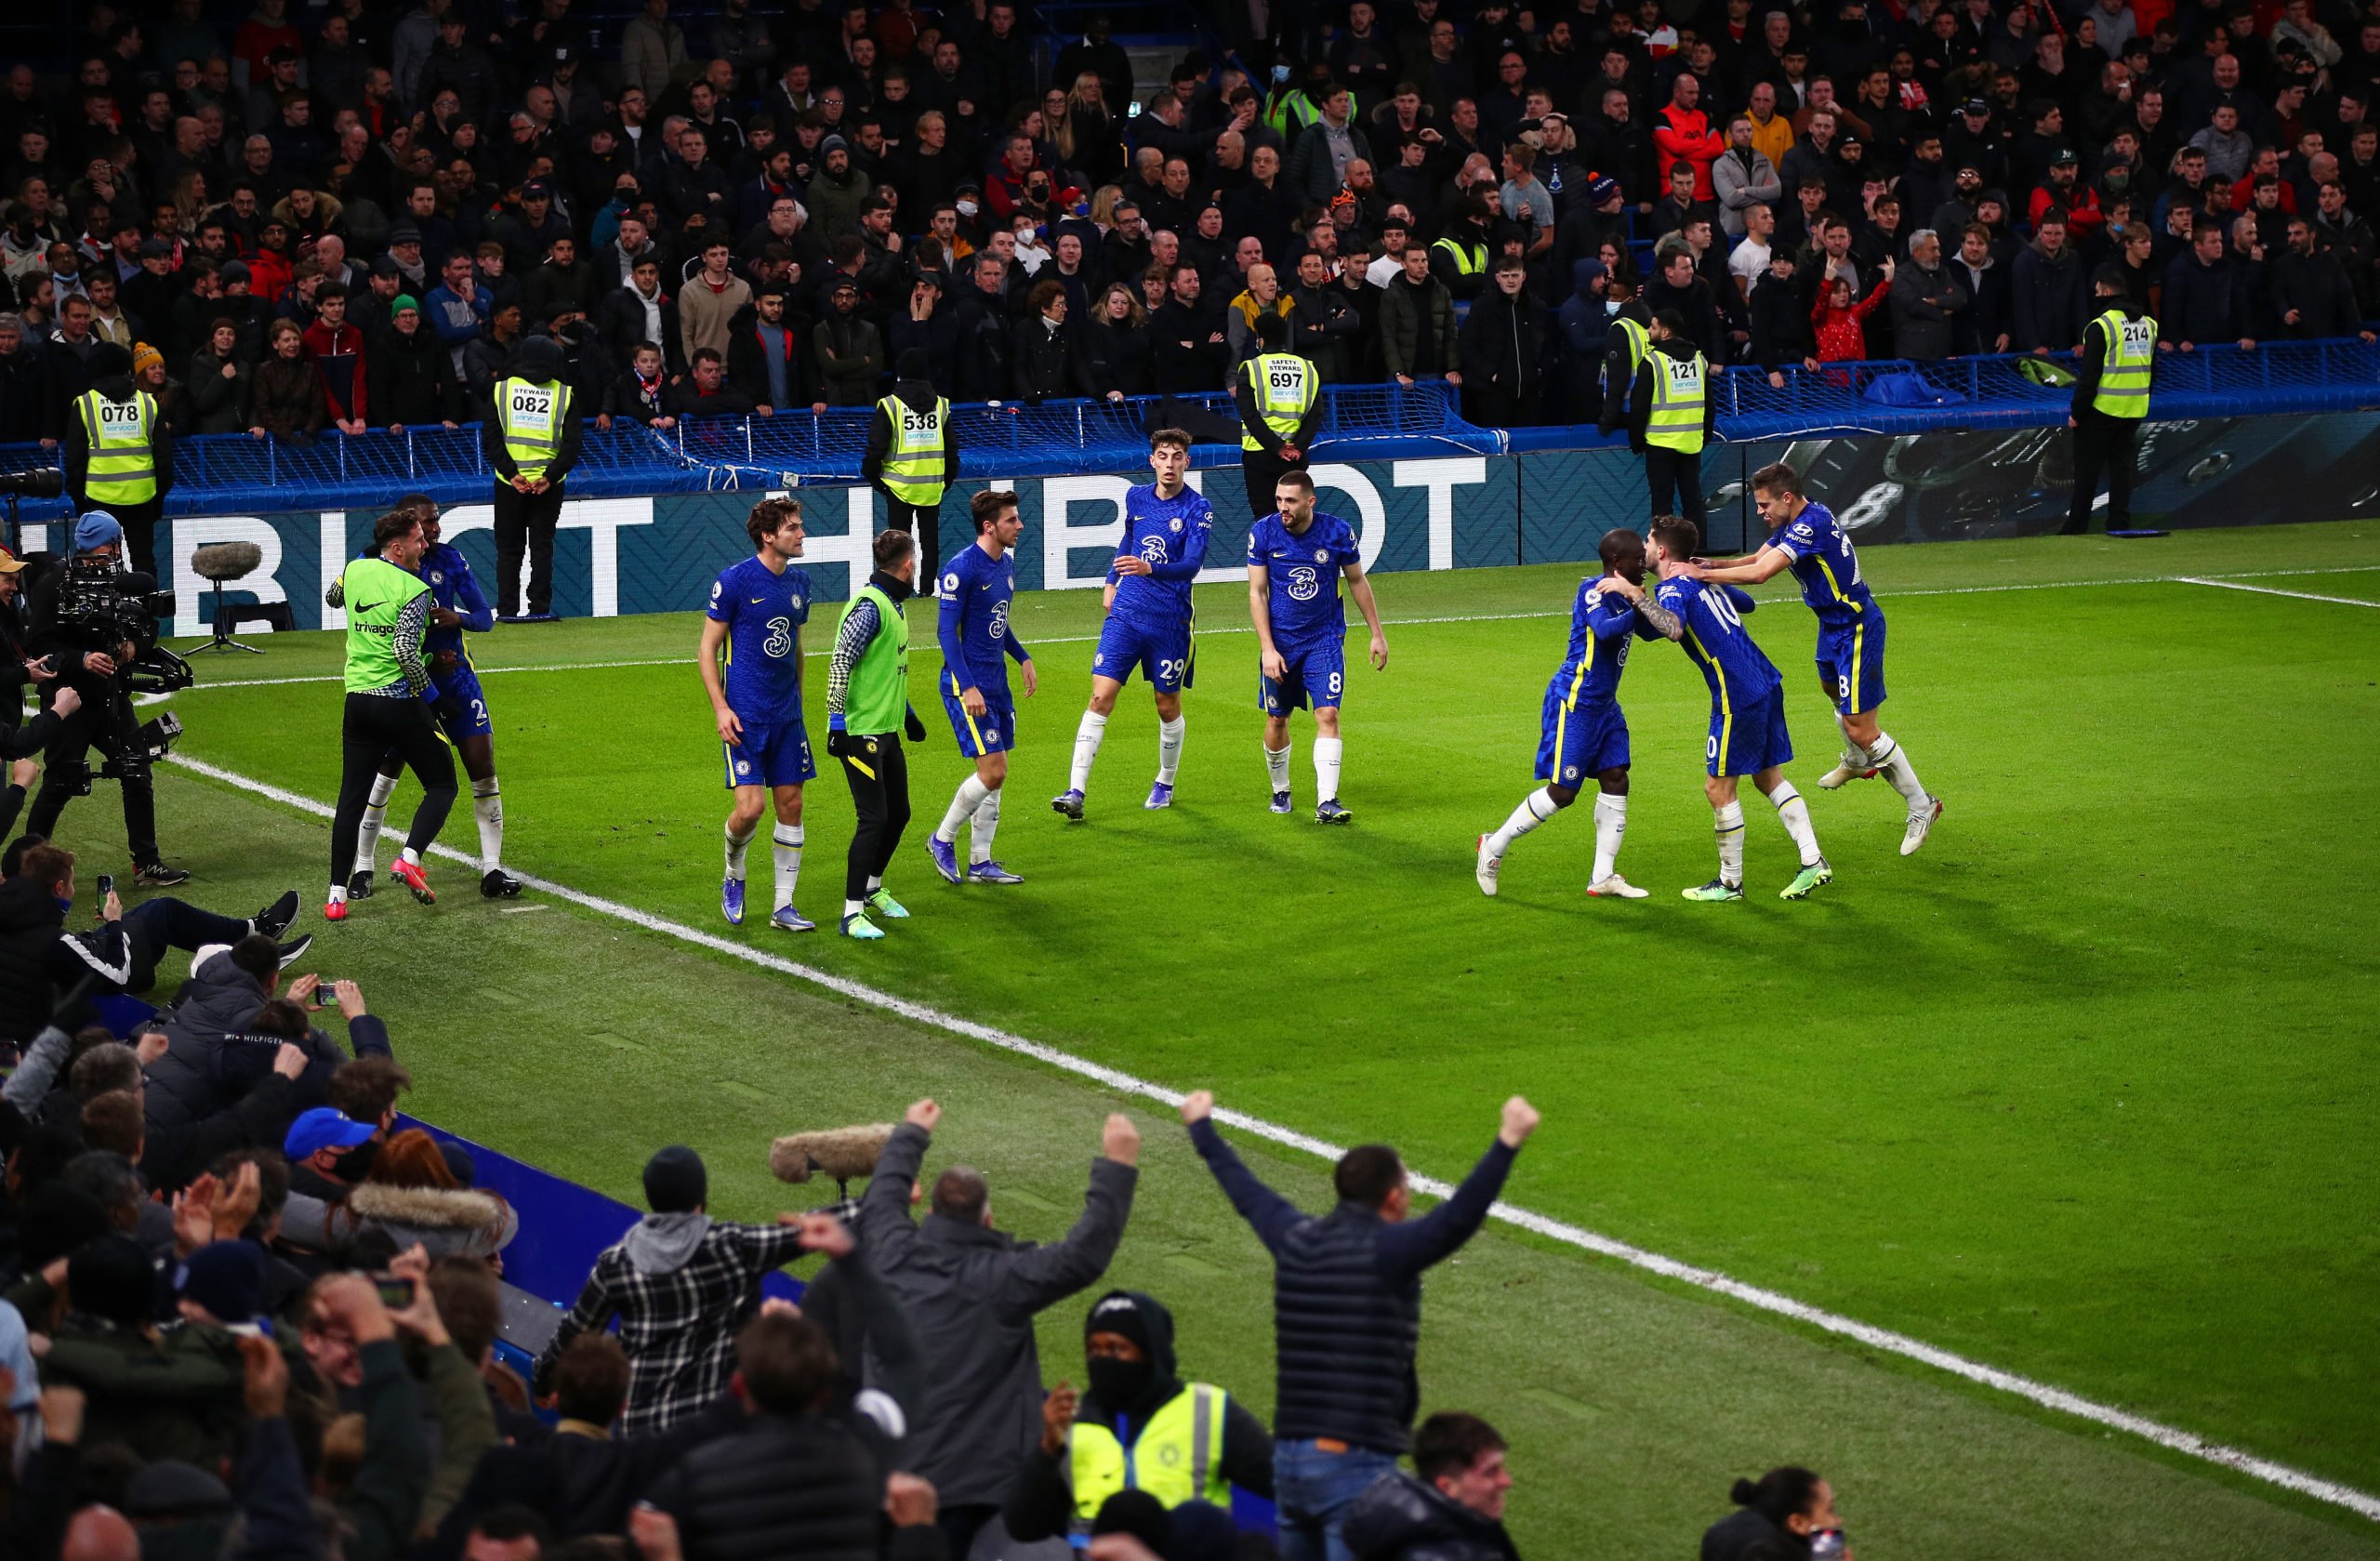 'I did not realise': BBC pundit says he was shocked by just how fast Chelsea player is at the weekend